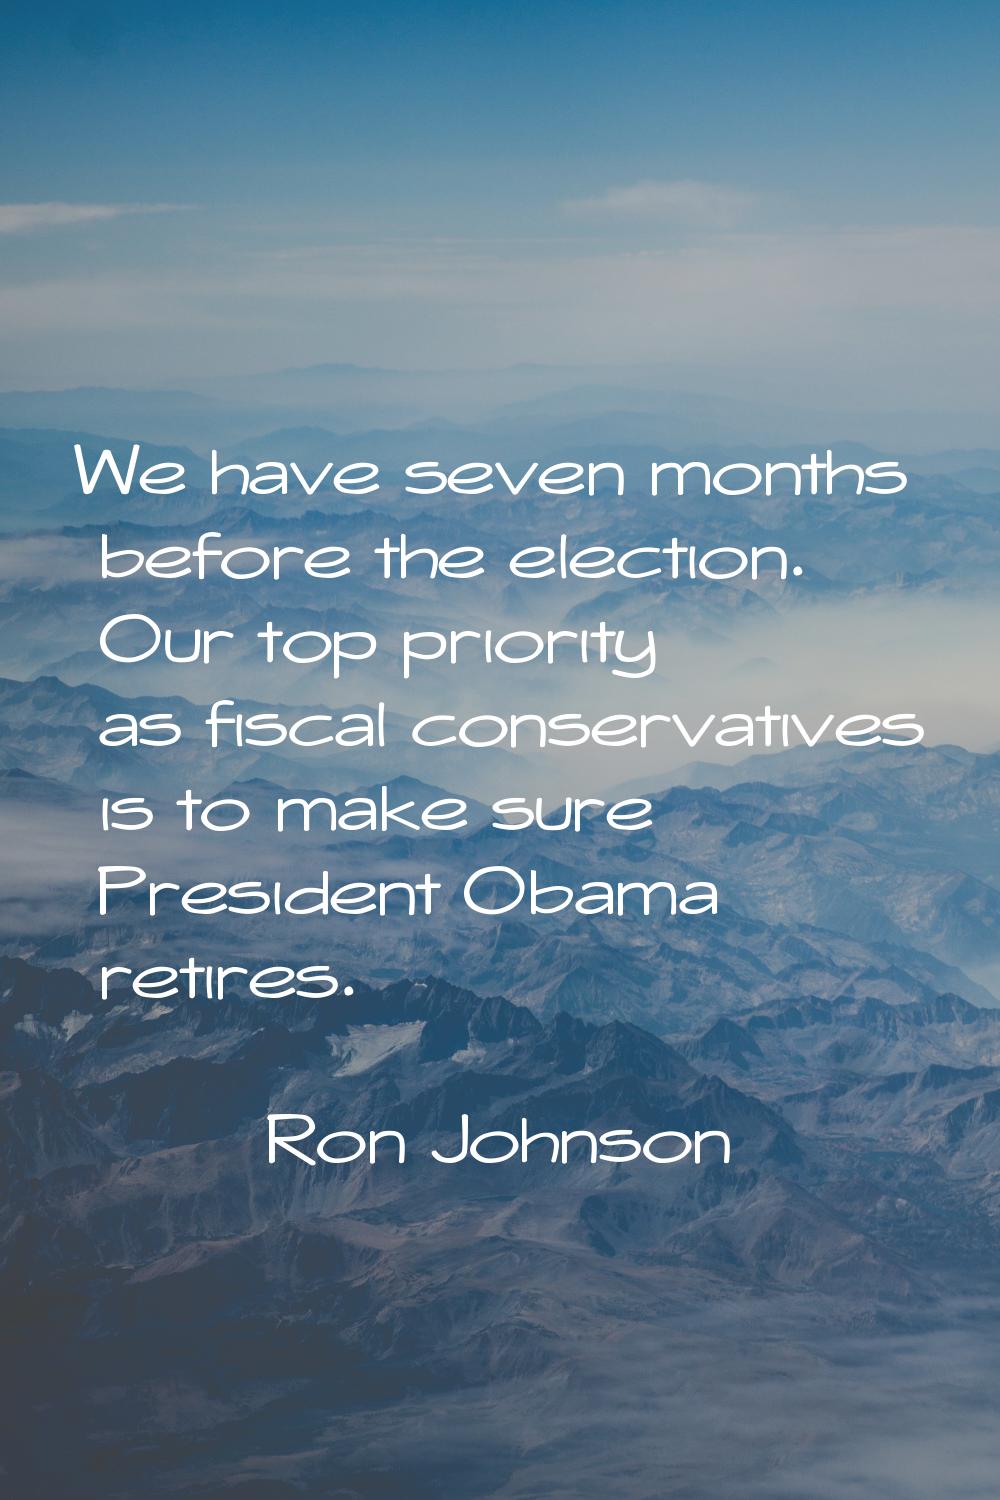 We have seven months before the election. Our top priority as fiscal conservatives is to make sure 